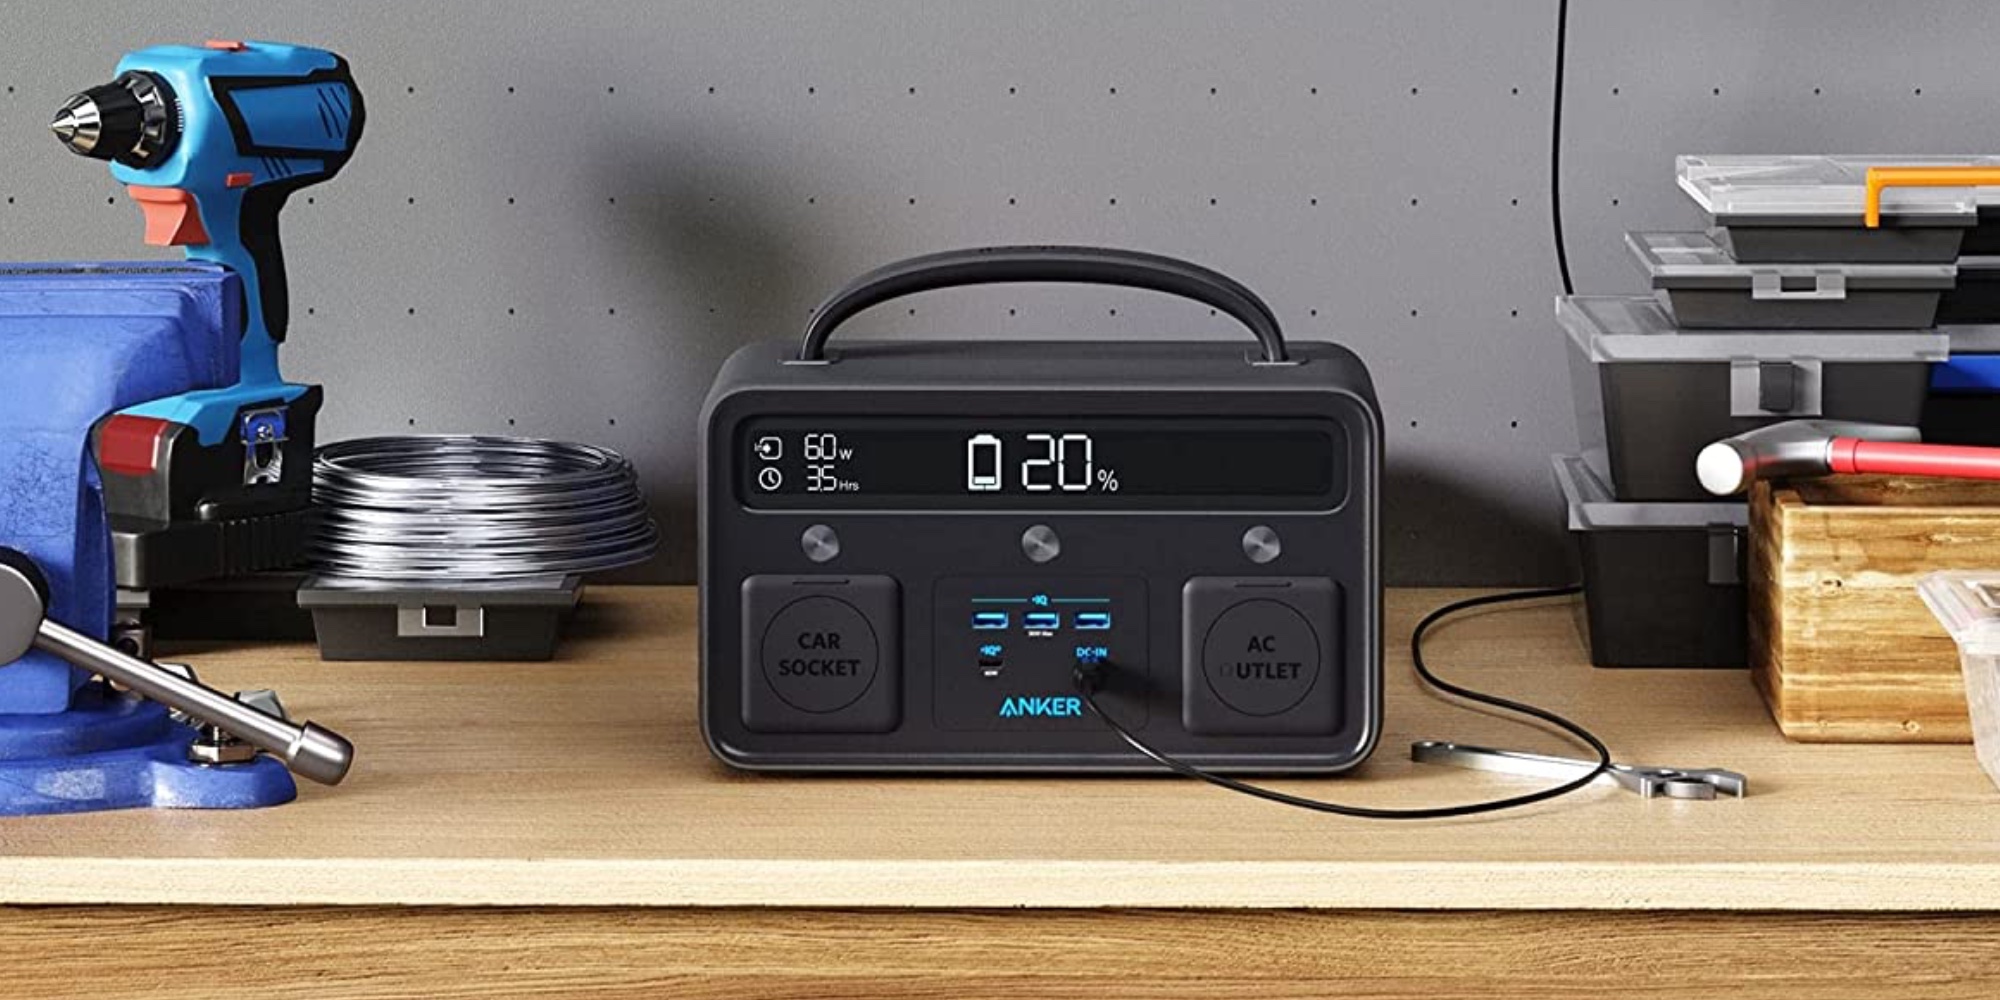 Anker expands portable power station lineup with all-new